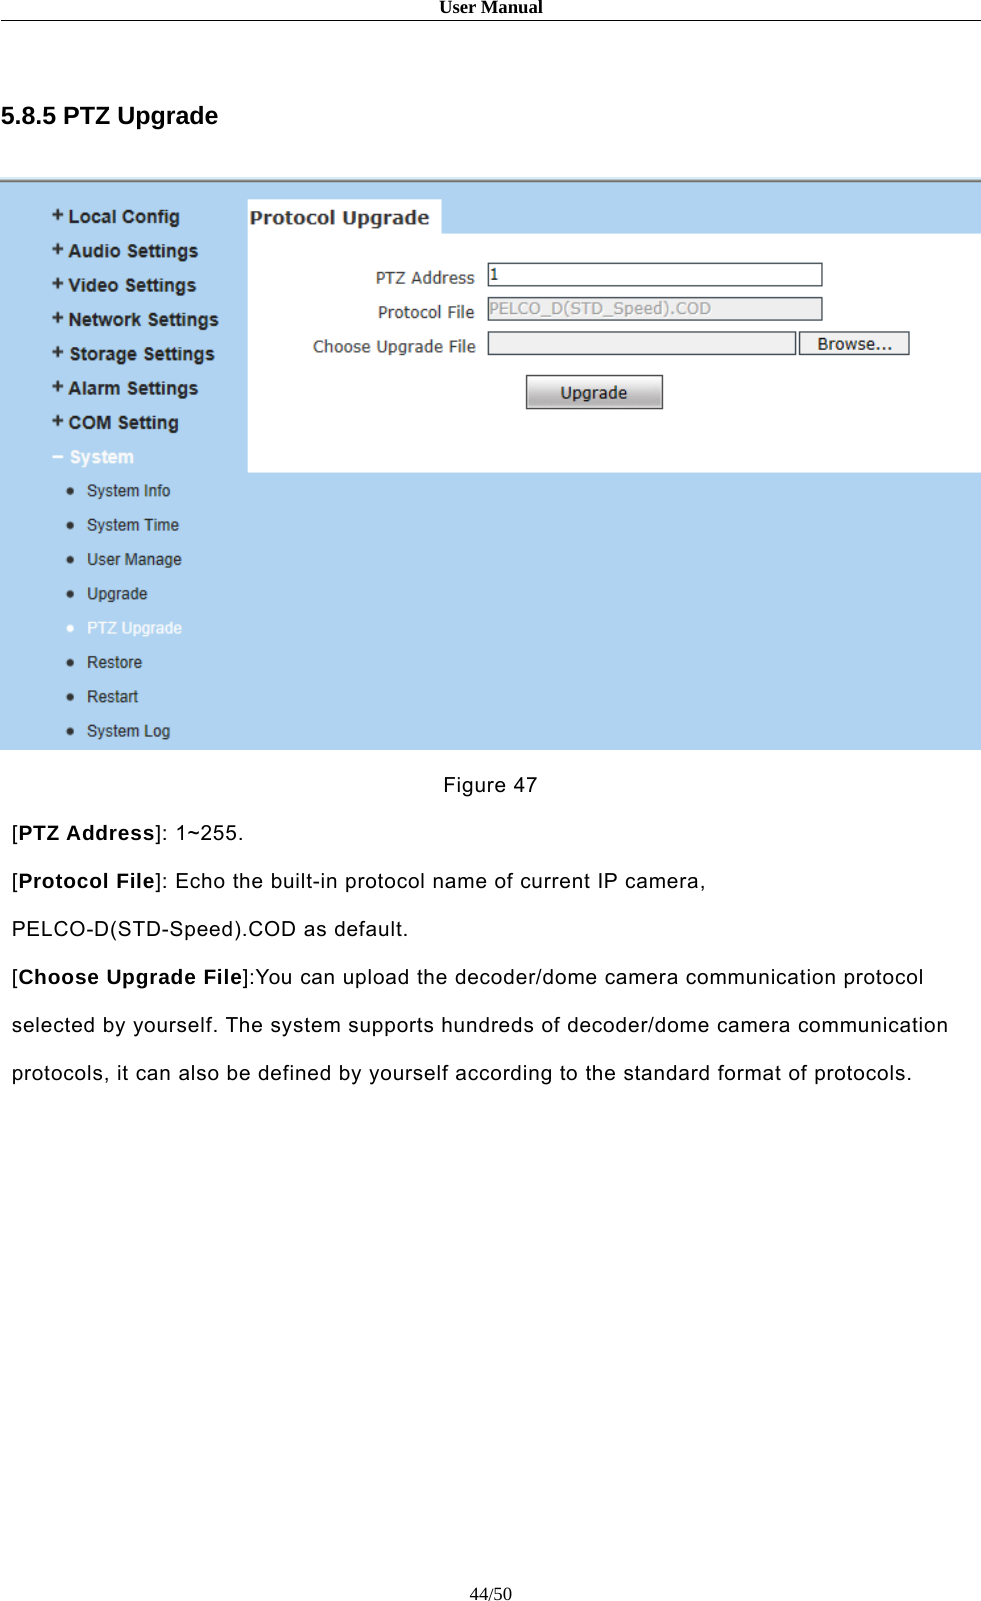 User Manual44/505.8.5 PTZ UpgradeFigure 47[PTZ Address]: 1~255.[Protocol File]: Echo the built-in protocol name of current IP camera,PELCO-D(STD-Speed).COD as default.[Choose Upgrade File]:You can upload the decoder/dome camera communication protocolselected by yourself. The system supports hundreds of decoder/dome camera communicationprotocols, it can also be defined by yourself according to the standard format of protocols.